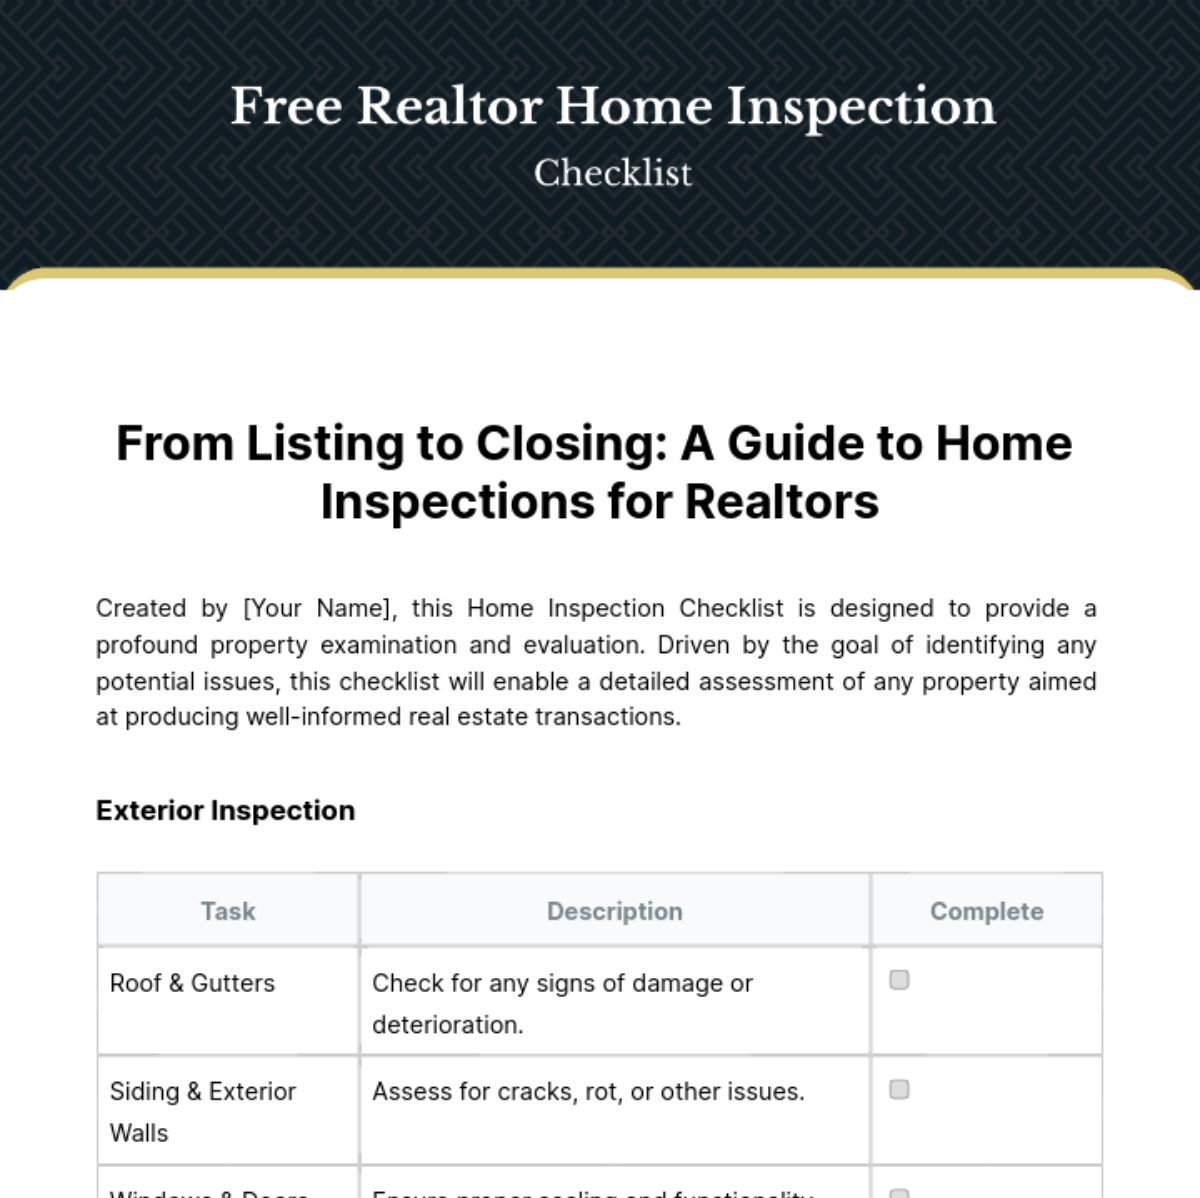 Free Realtor Home Inspection Checklist Template